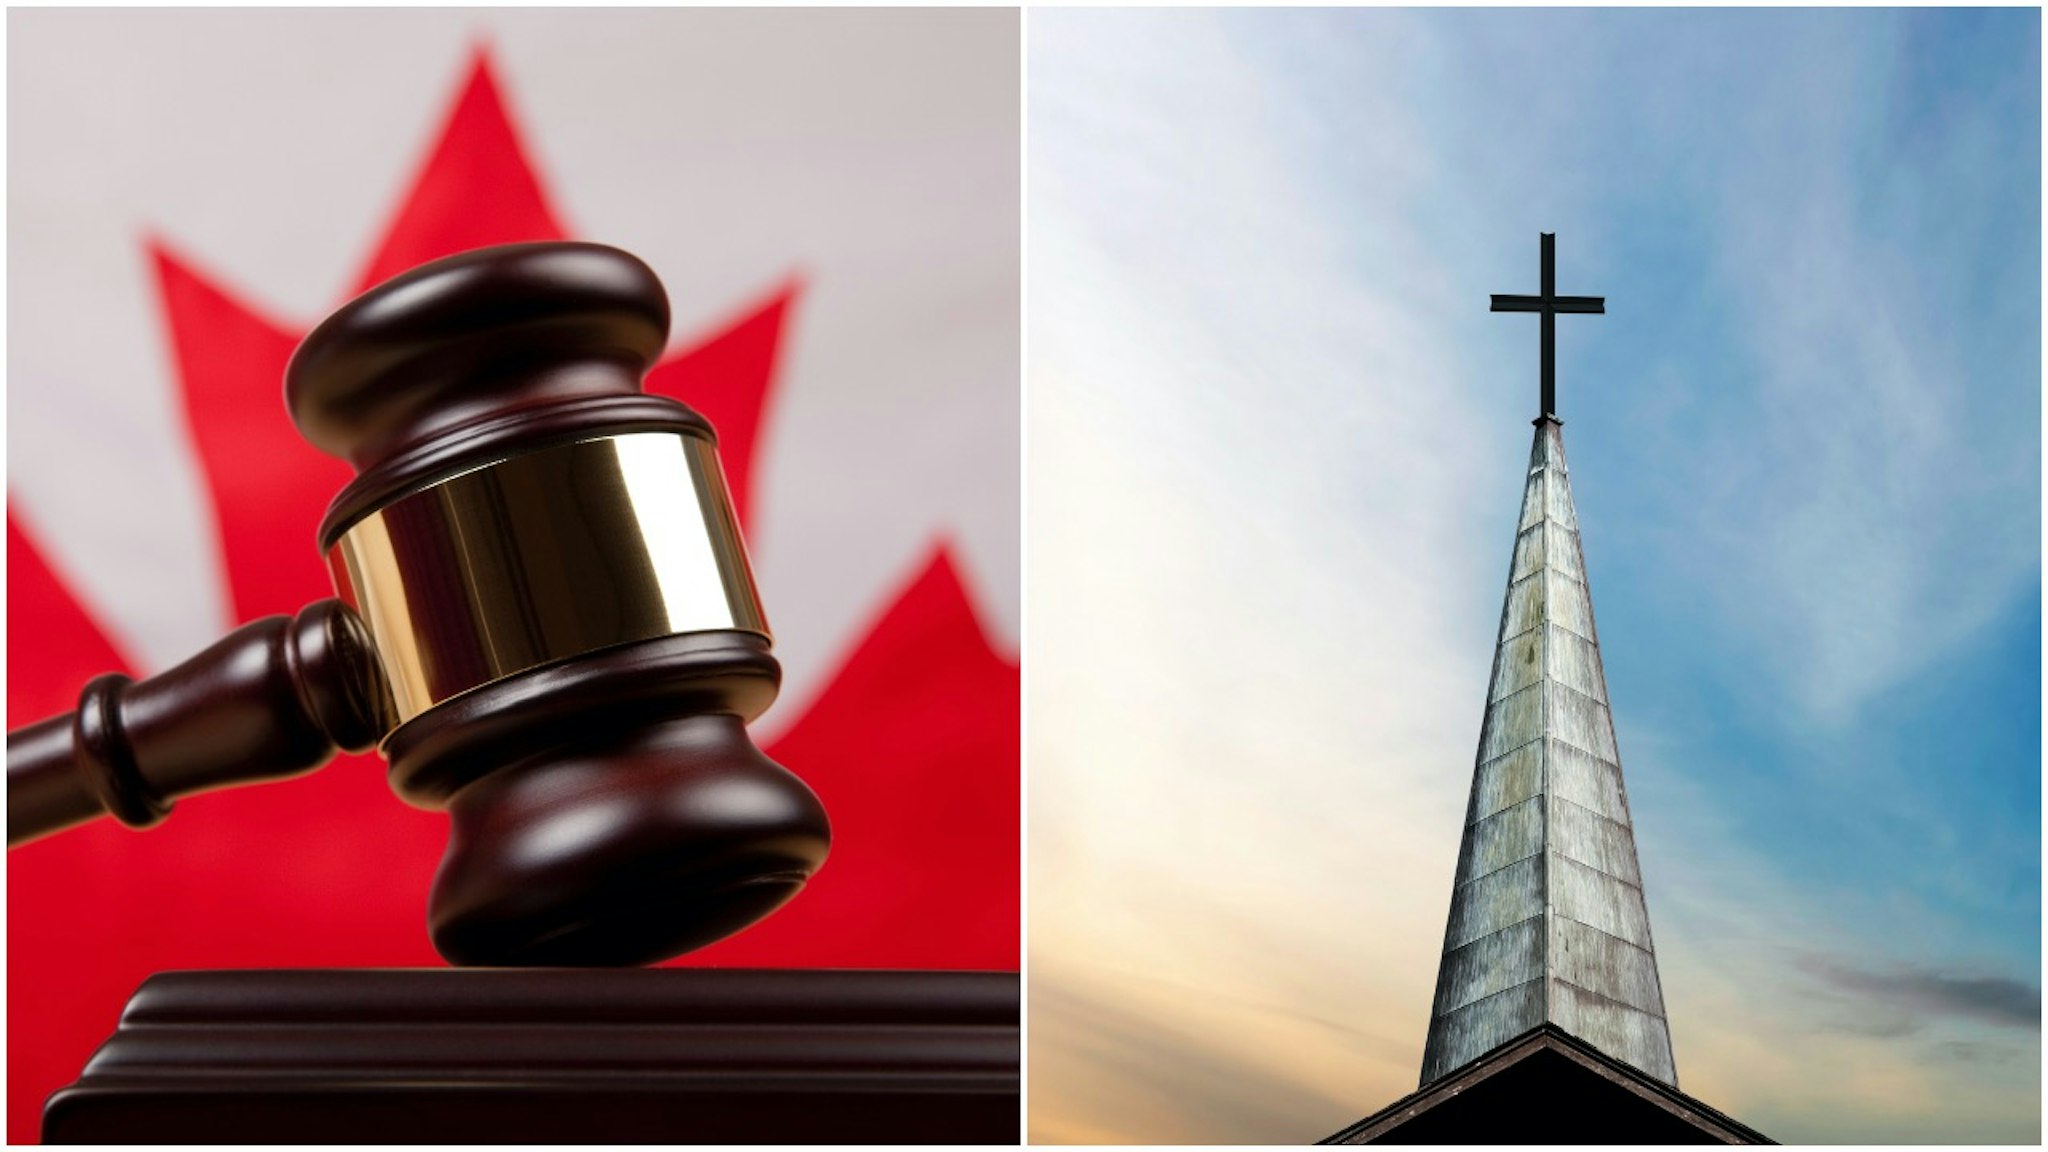 Canada court and steeple